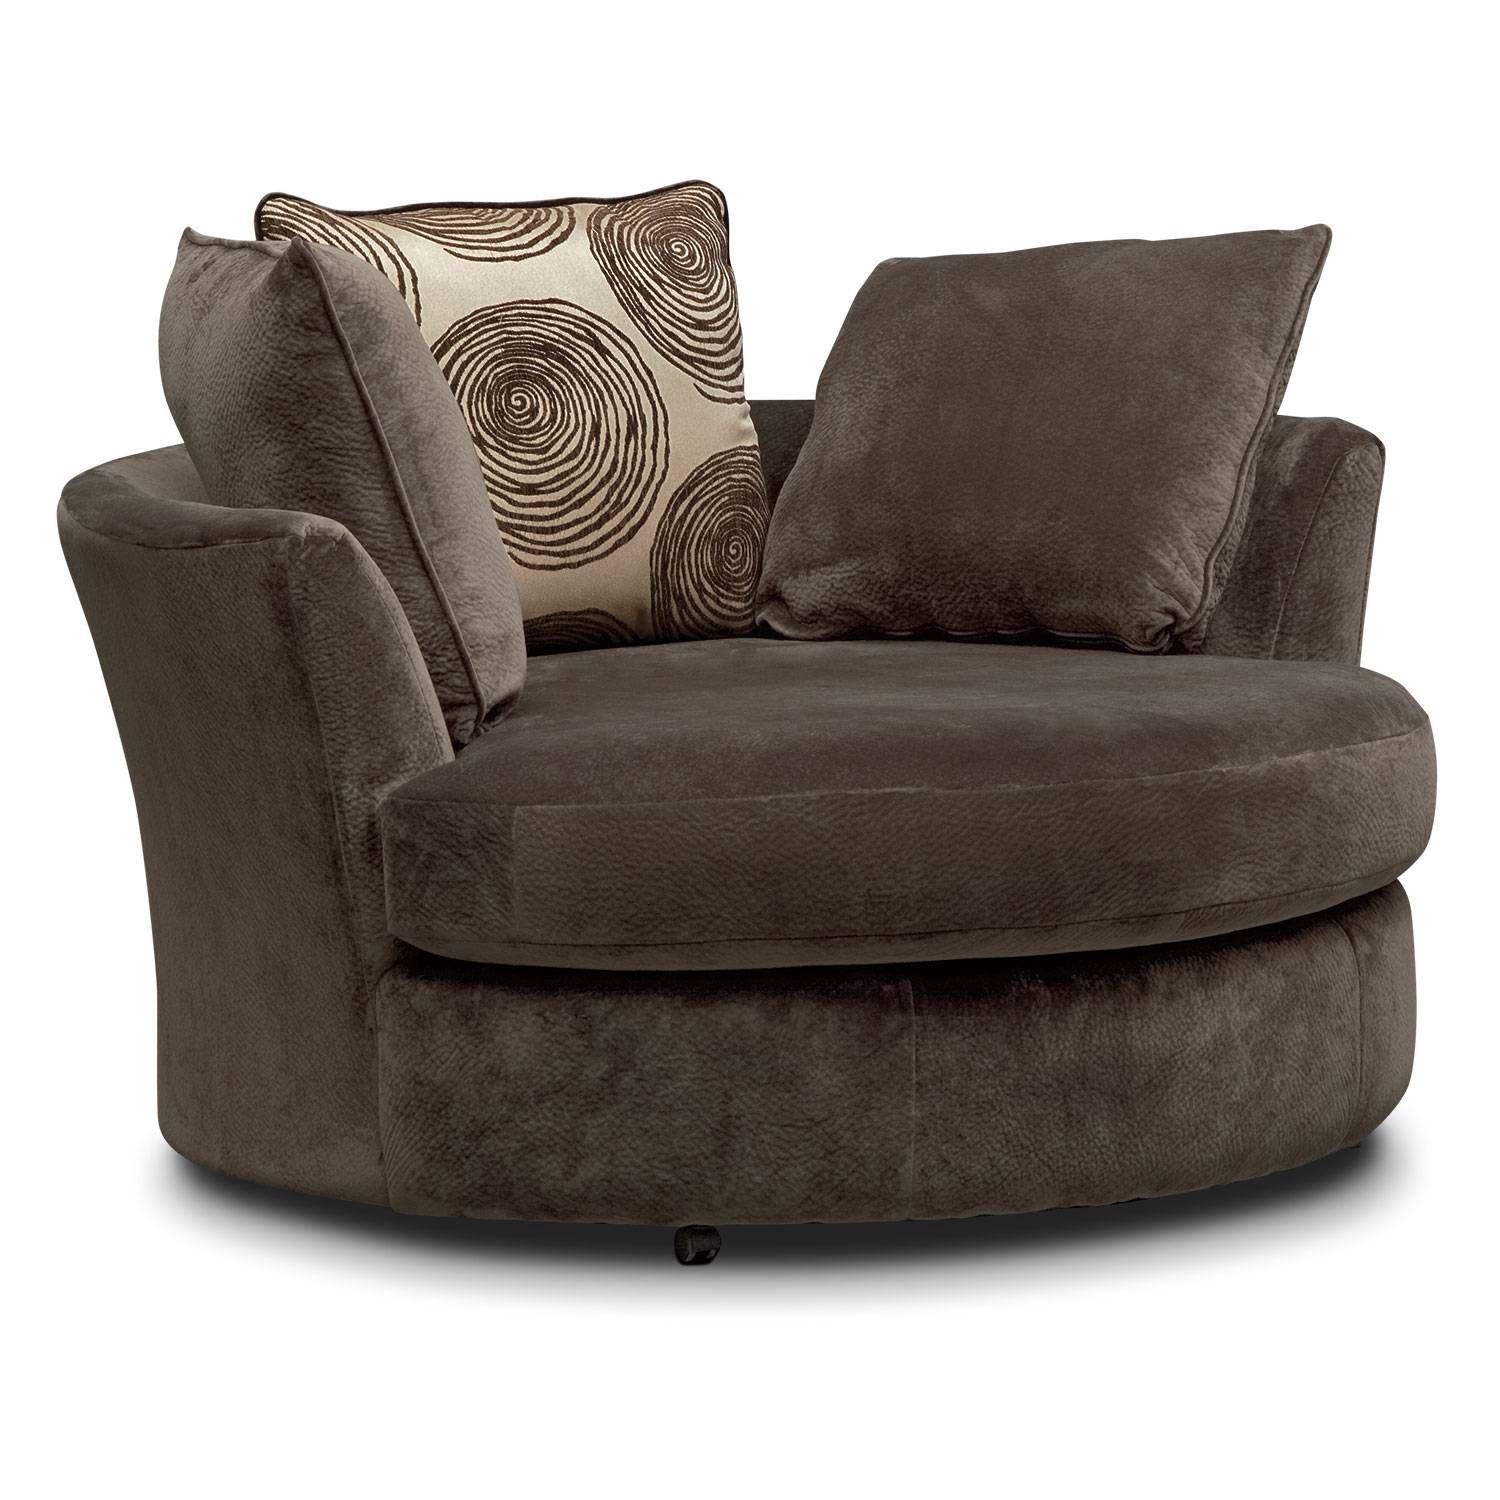 Cordelle Swivel Chair – Chocolate | Value City Furniture Regarding Round Swivel Sofa Chairs (View 3 of 30)